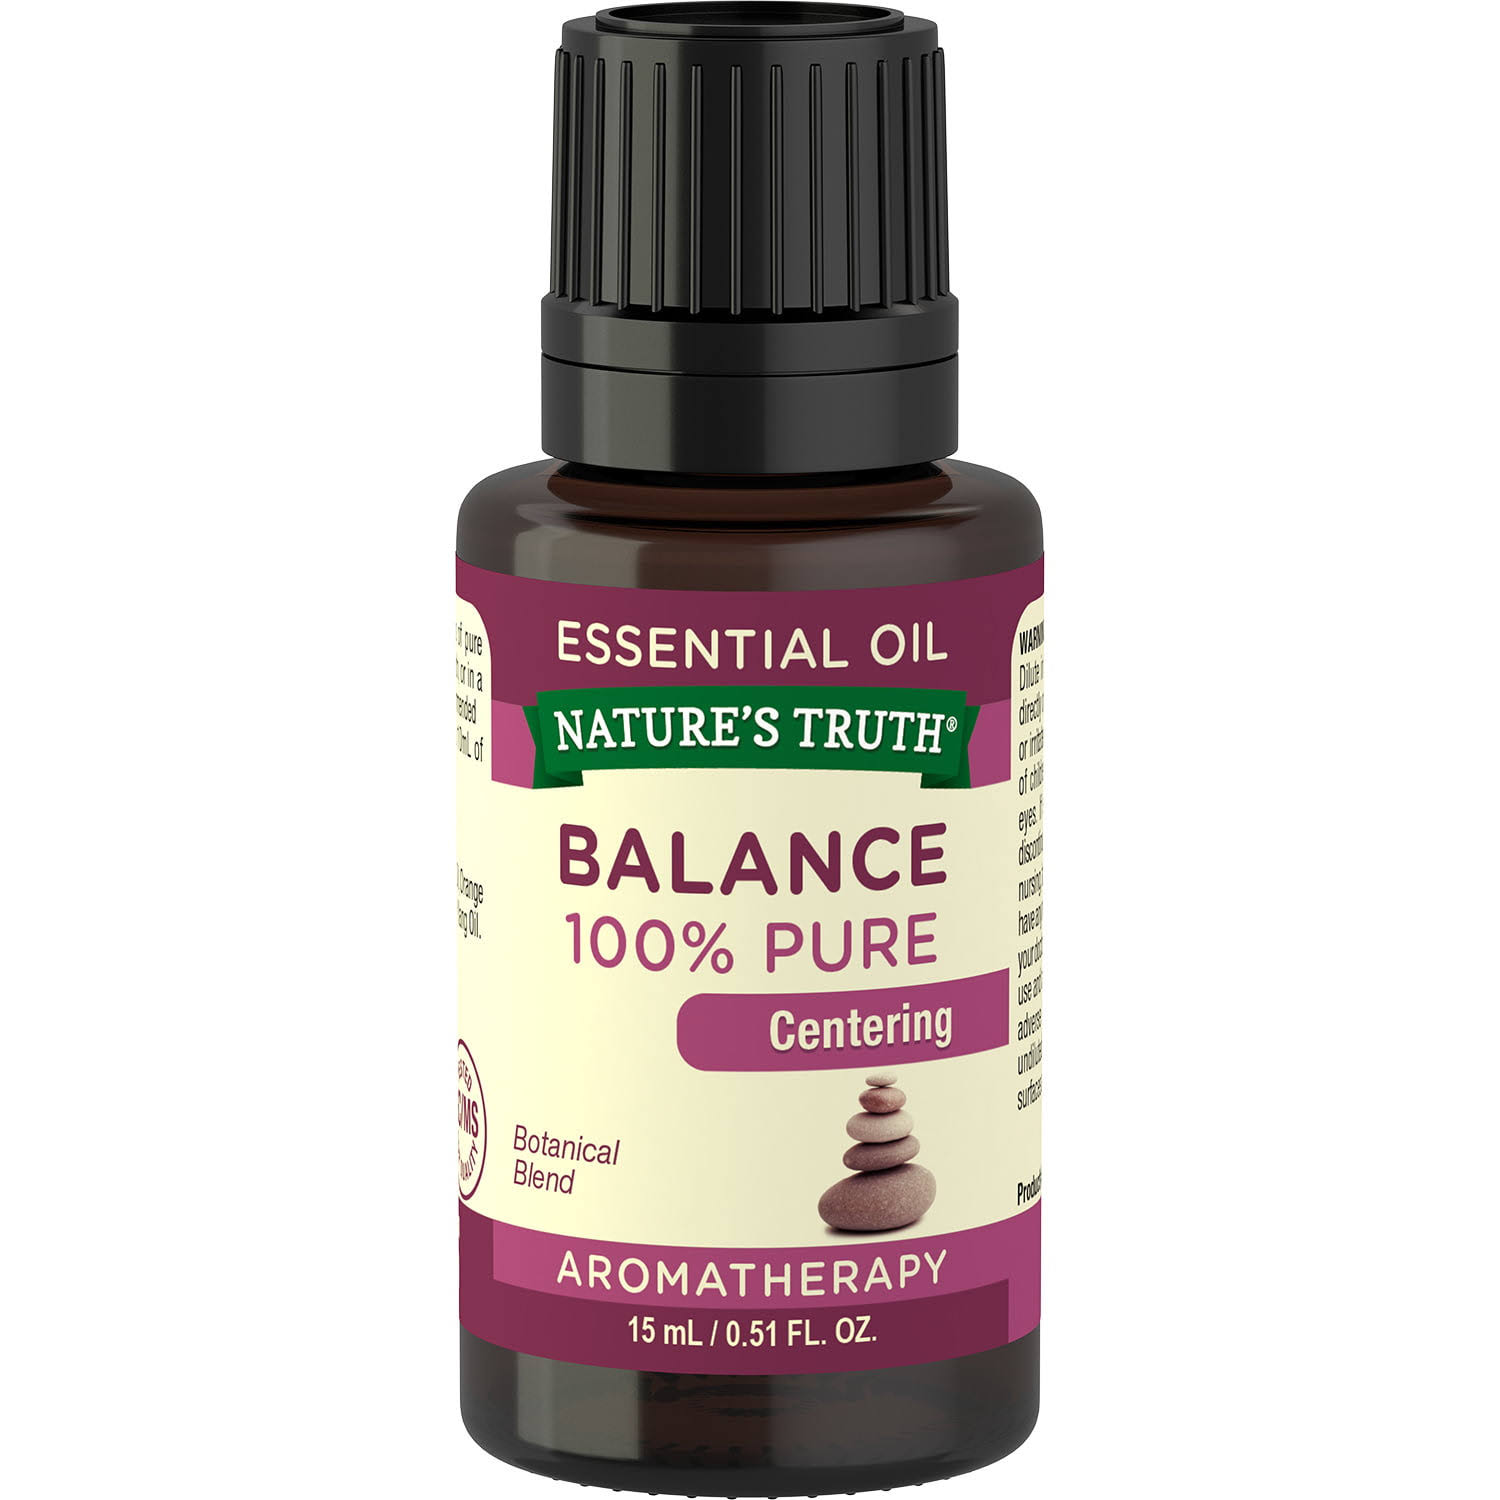 Nature's Truth Aromatherapy Balance 100% Pure Centering Essential Oil - 15ml